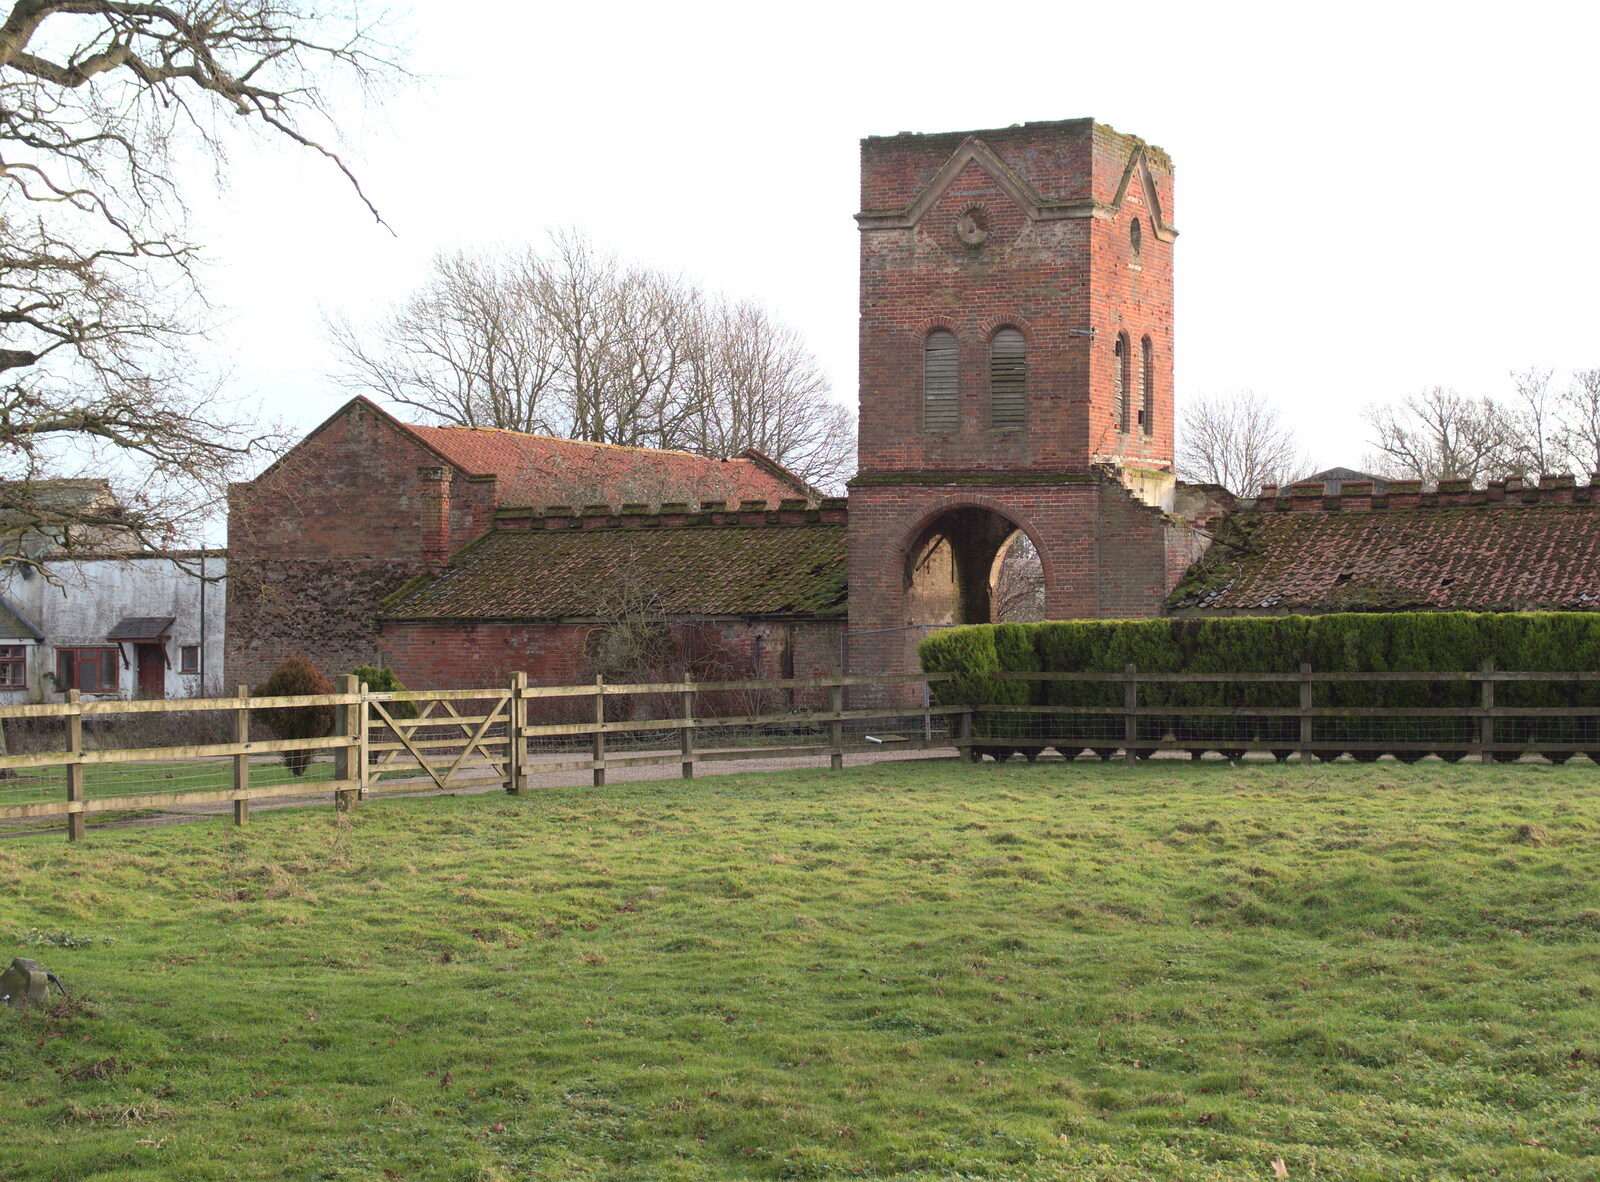 Another view of the clock tower from The BBs do a Recording, Hethel, Norfolk - 18th January 2015